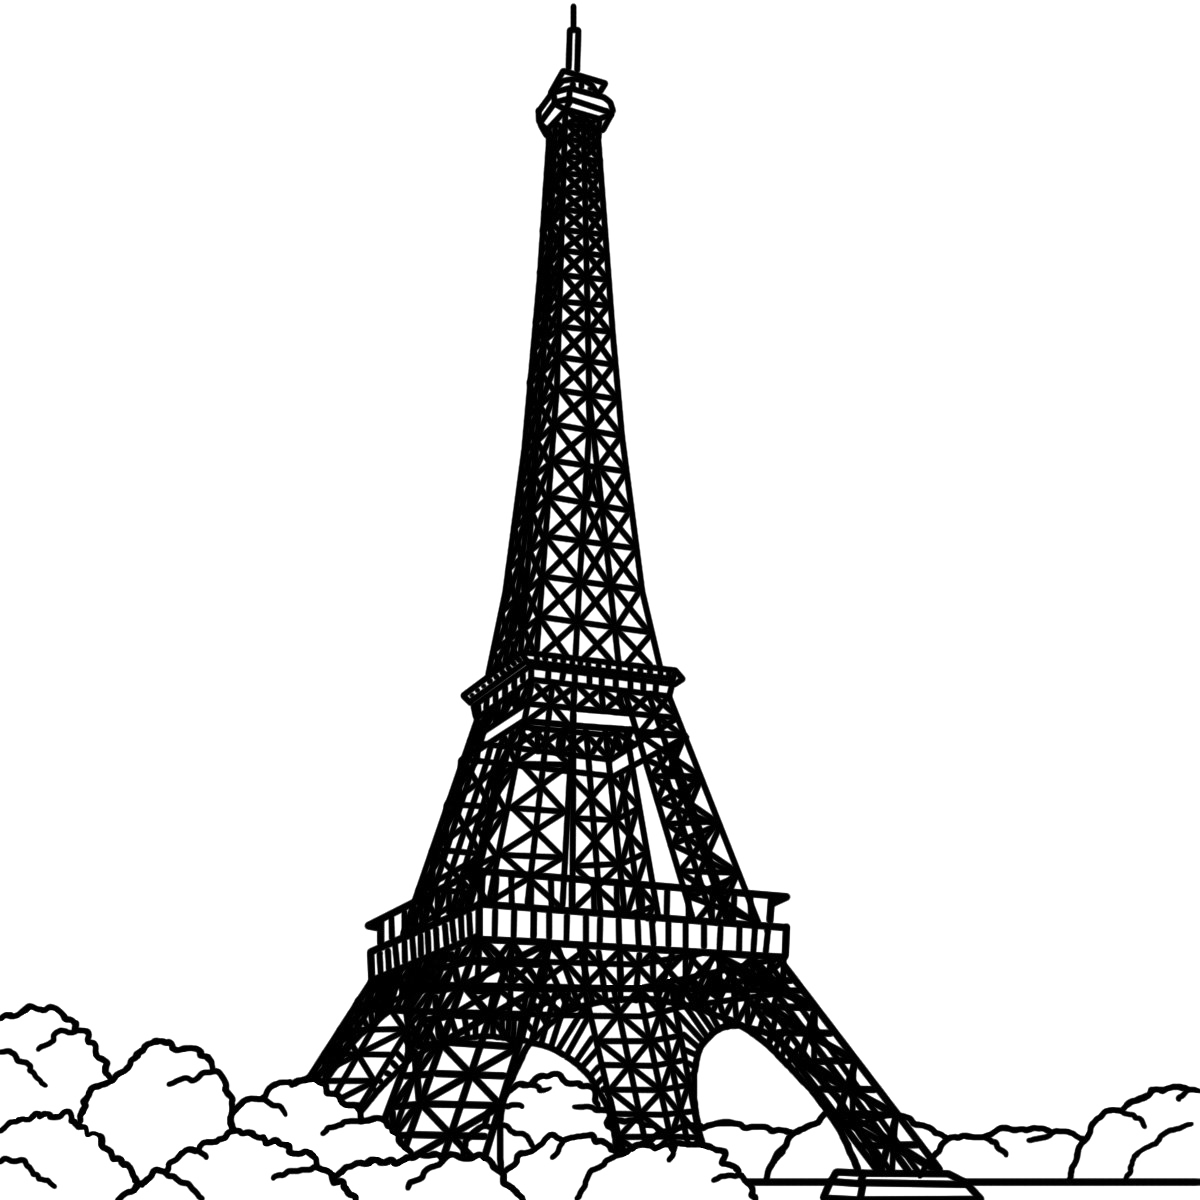 Eiffel Tower Silhouette PNG Image Transparent Background